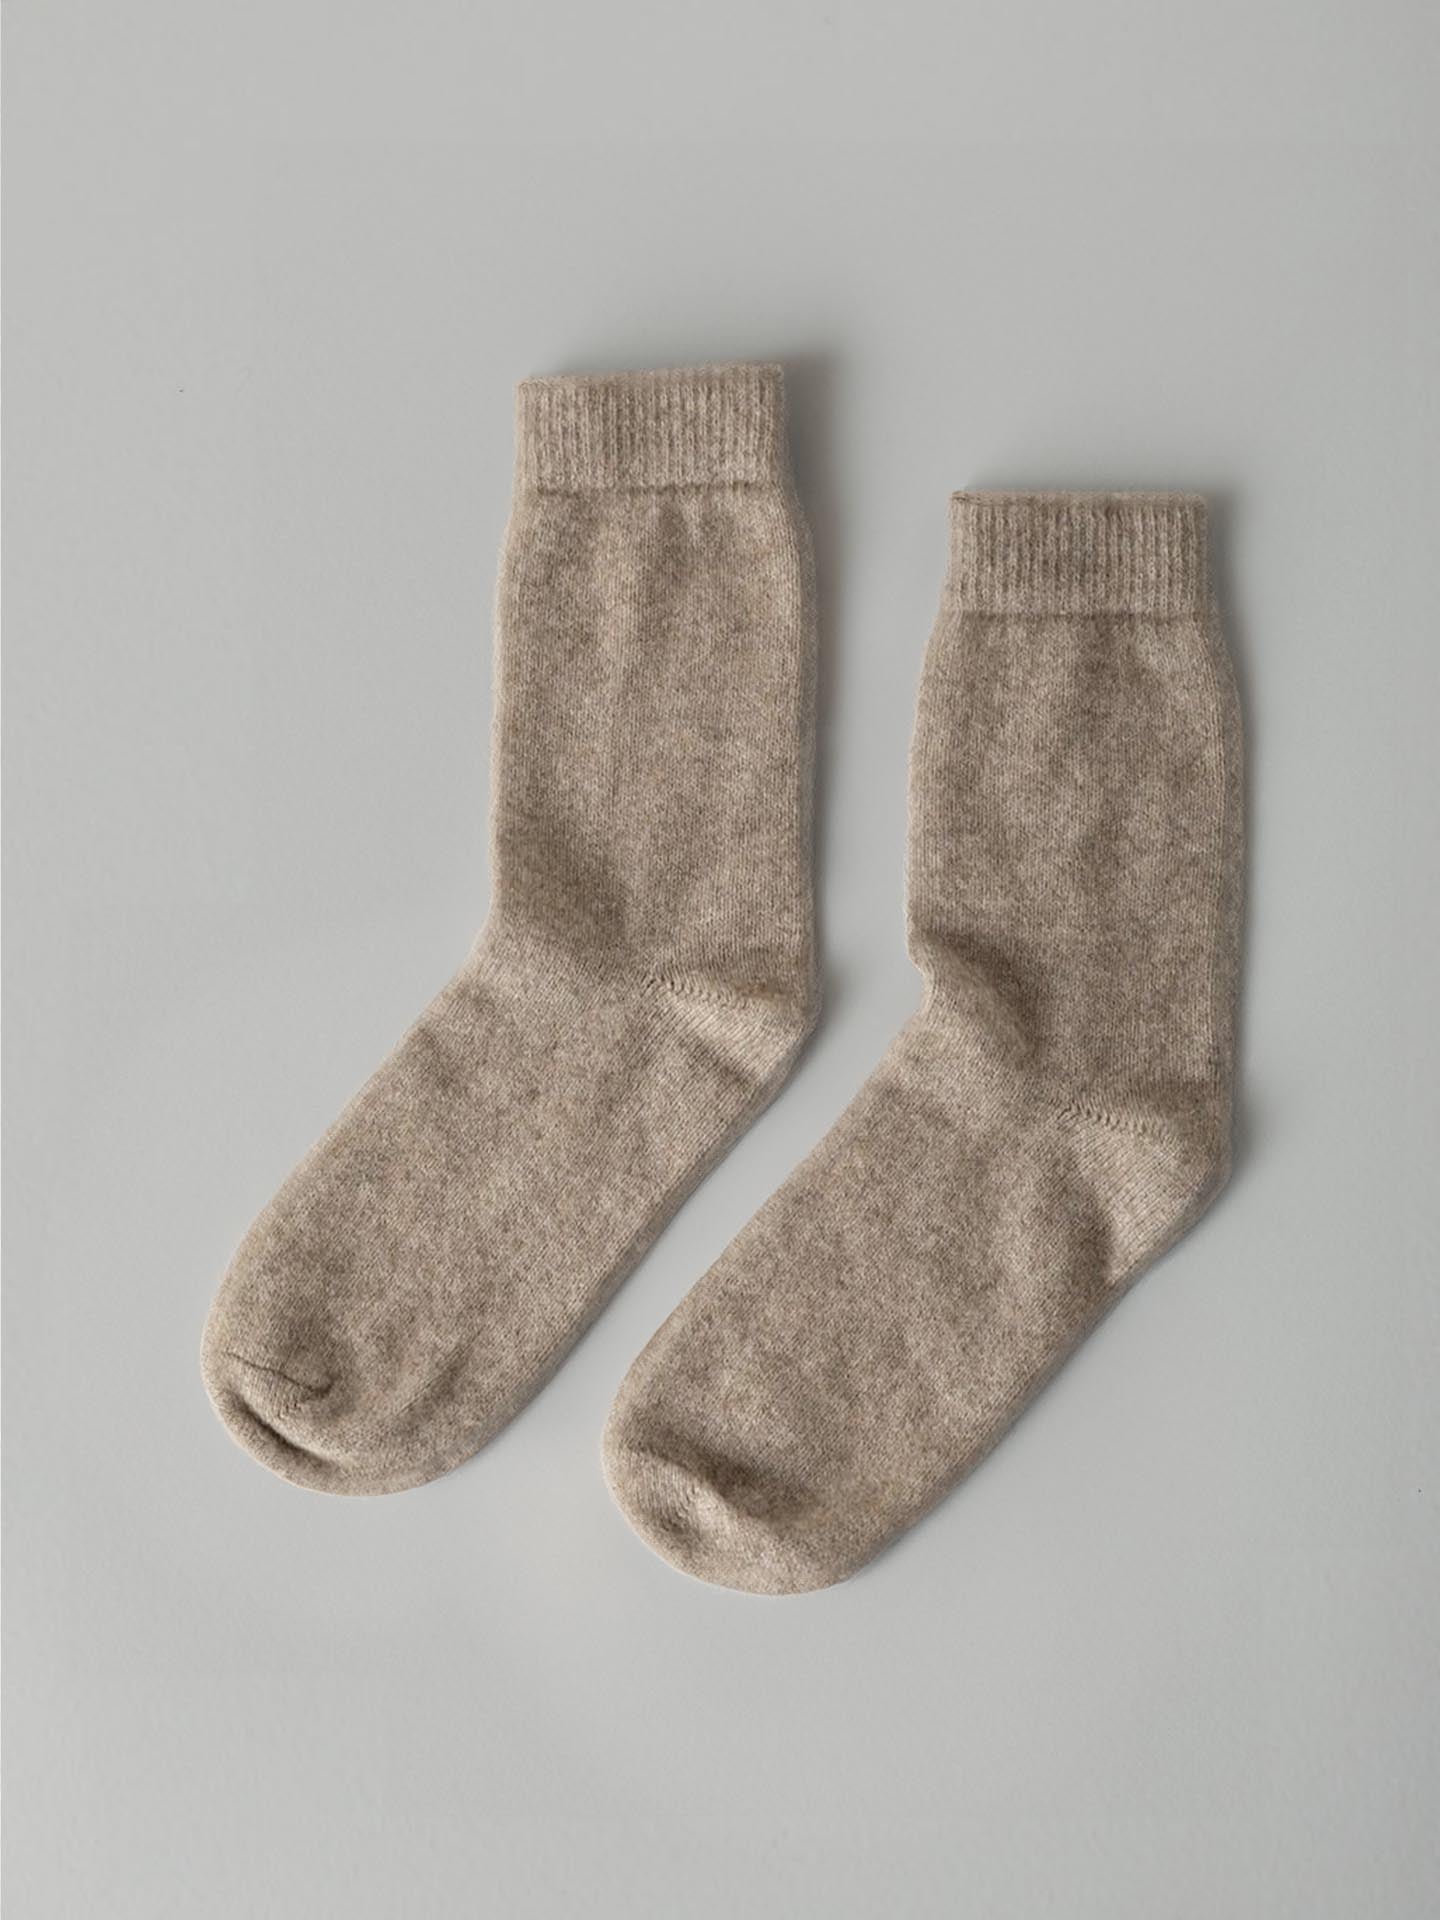 A pair of Possum Merino Socks – Natural from Francie laid flat on a gray surface.